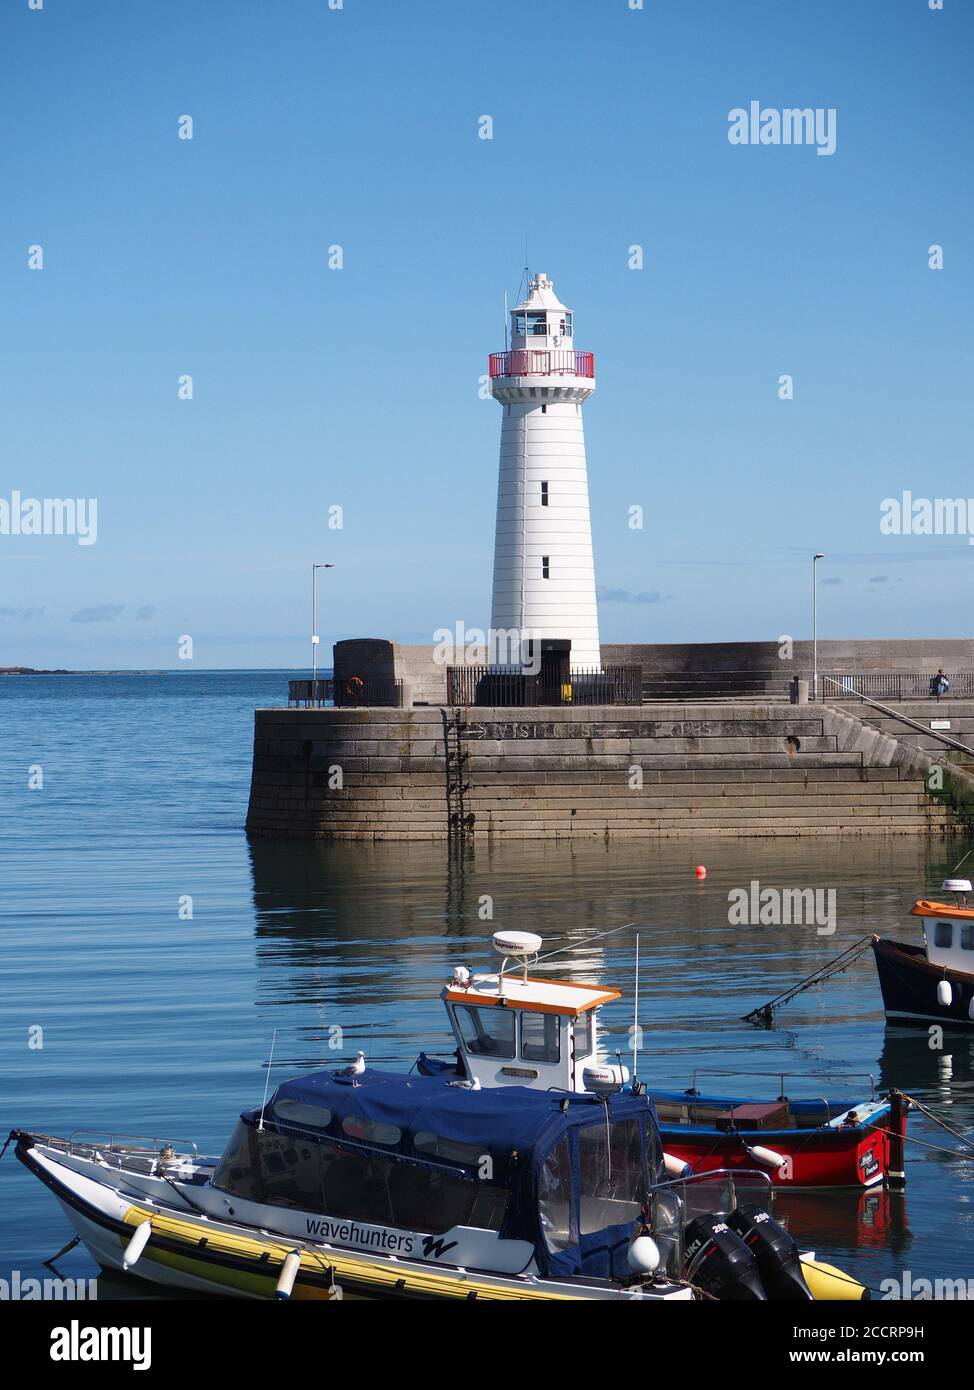 Sights of Donaghadee in County Down Stock Photo